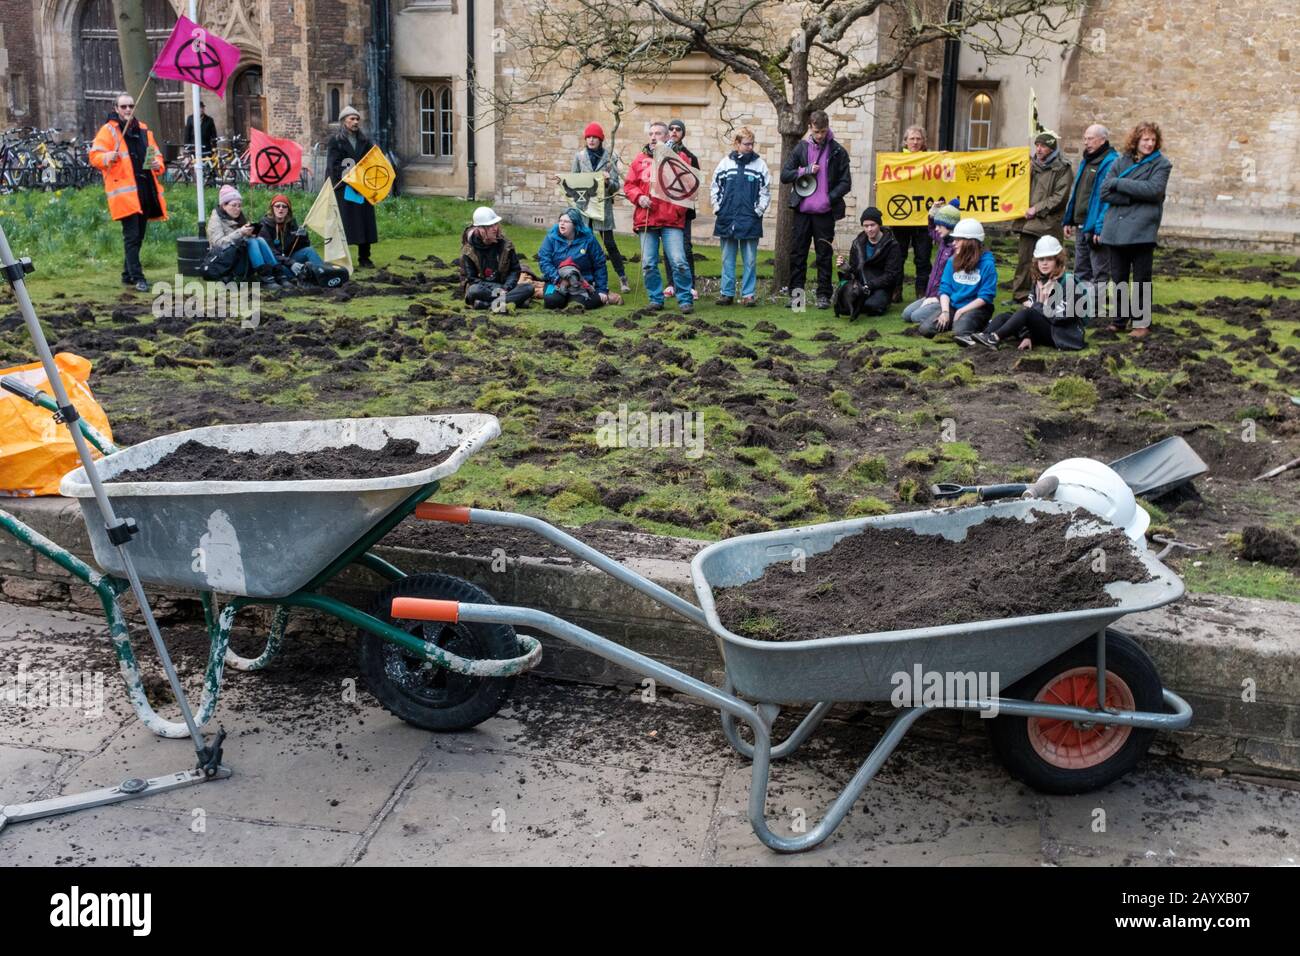 Cambridge, UK. 17th February 2020.  Extinction Rebellion protesters dig up Trinity College lawn as part of protests over ties between colleges and fossil fuel industry. Cam News/Alamy Live News Stock Photo